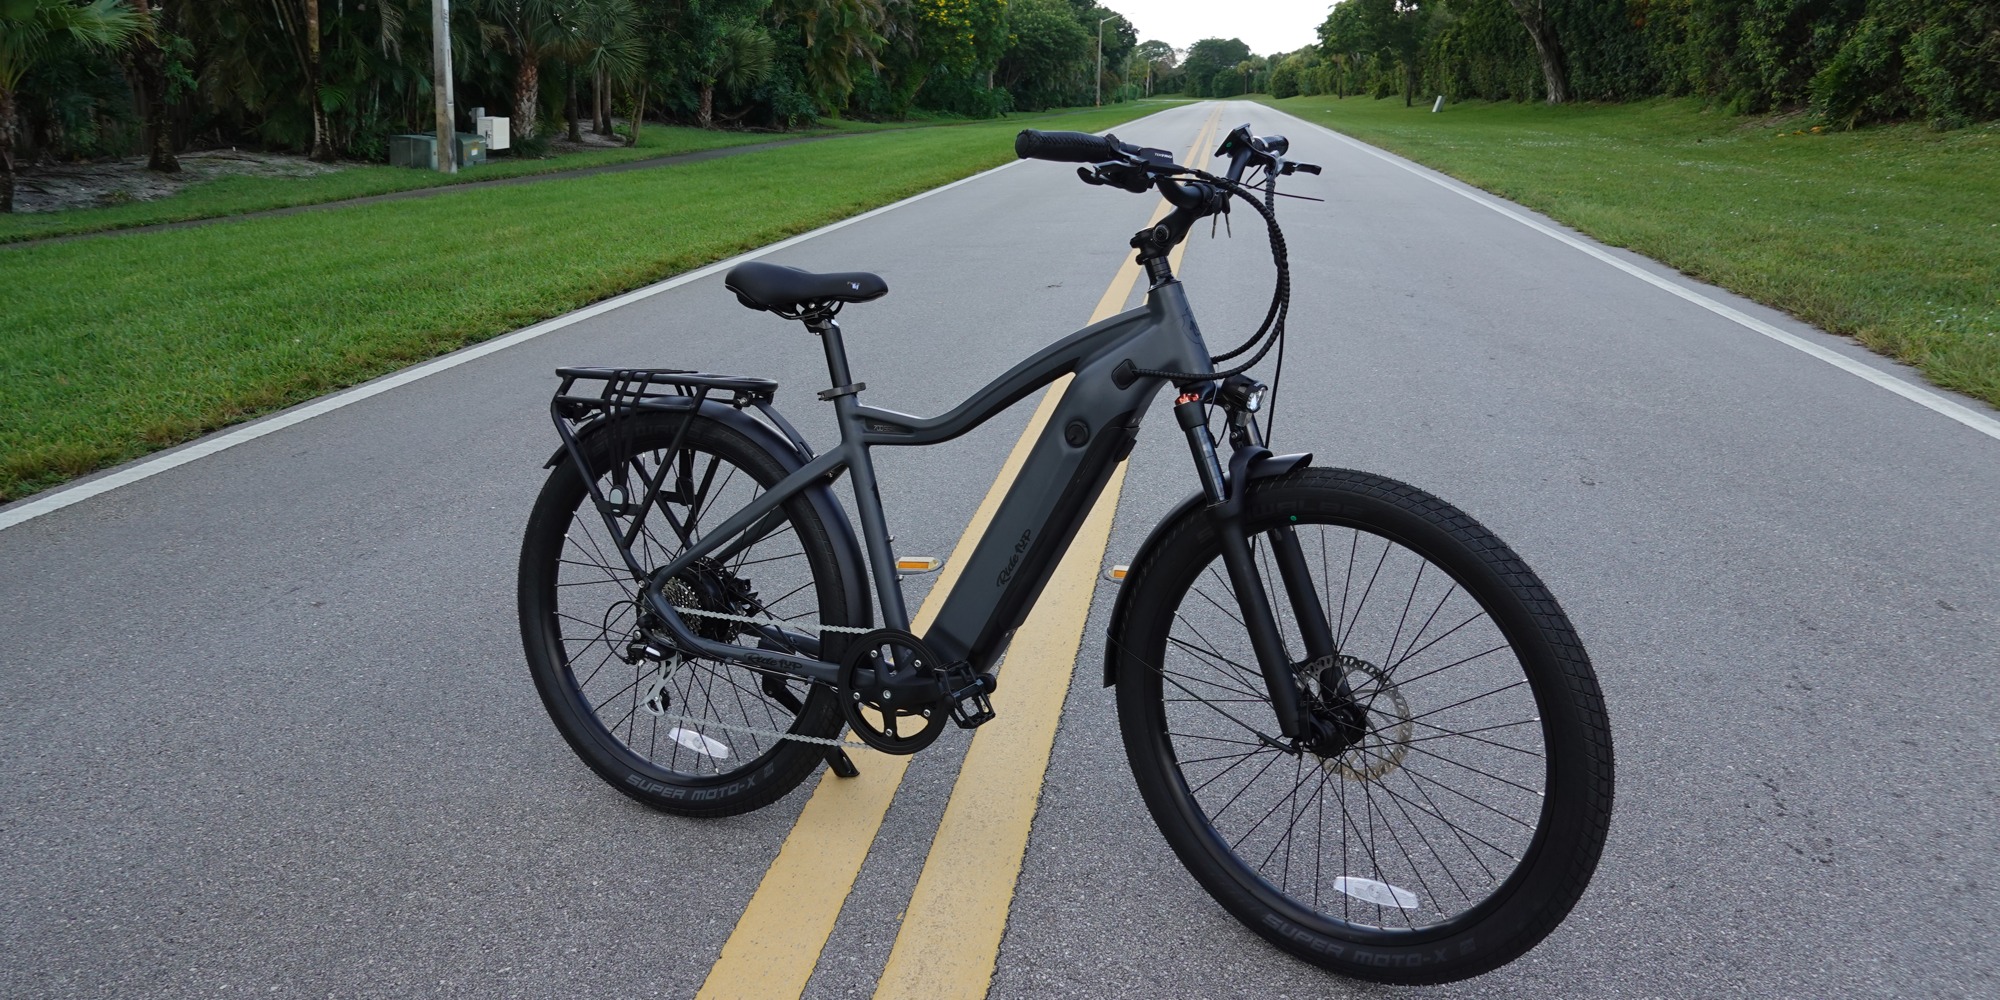 Ride1Up 700 Series review: The best 28 MPH electric commuter bike yet?